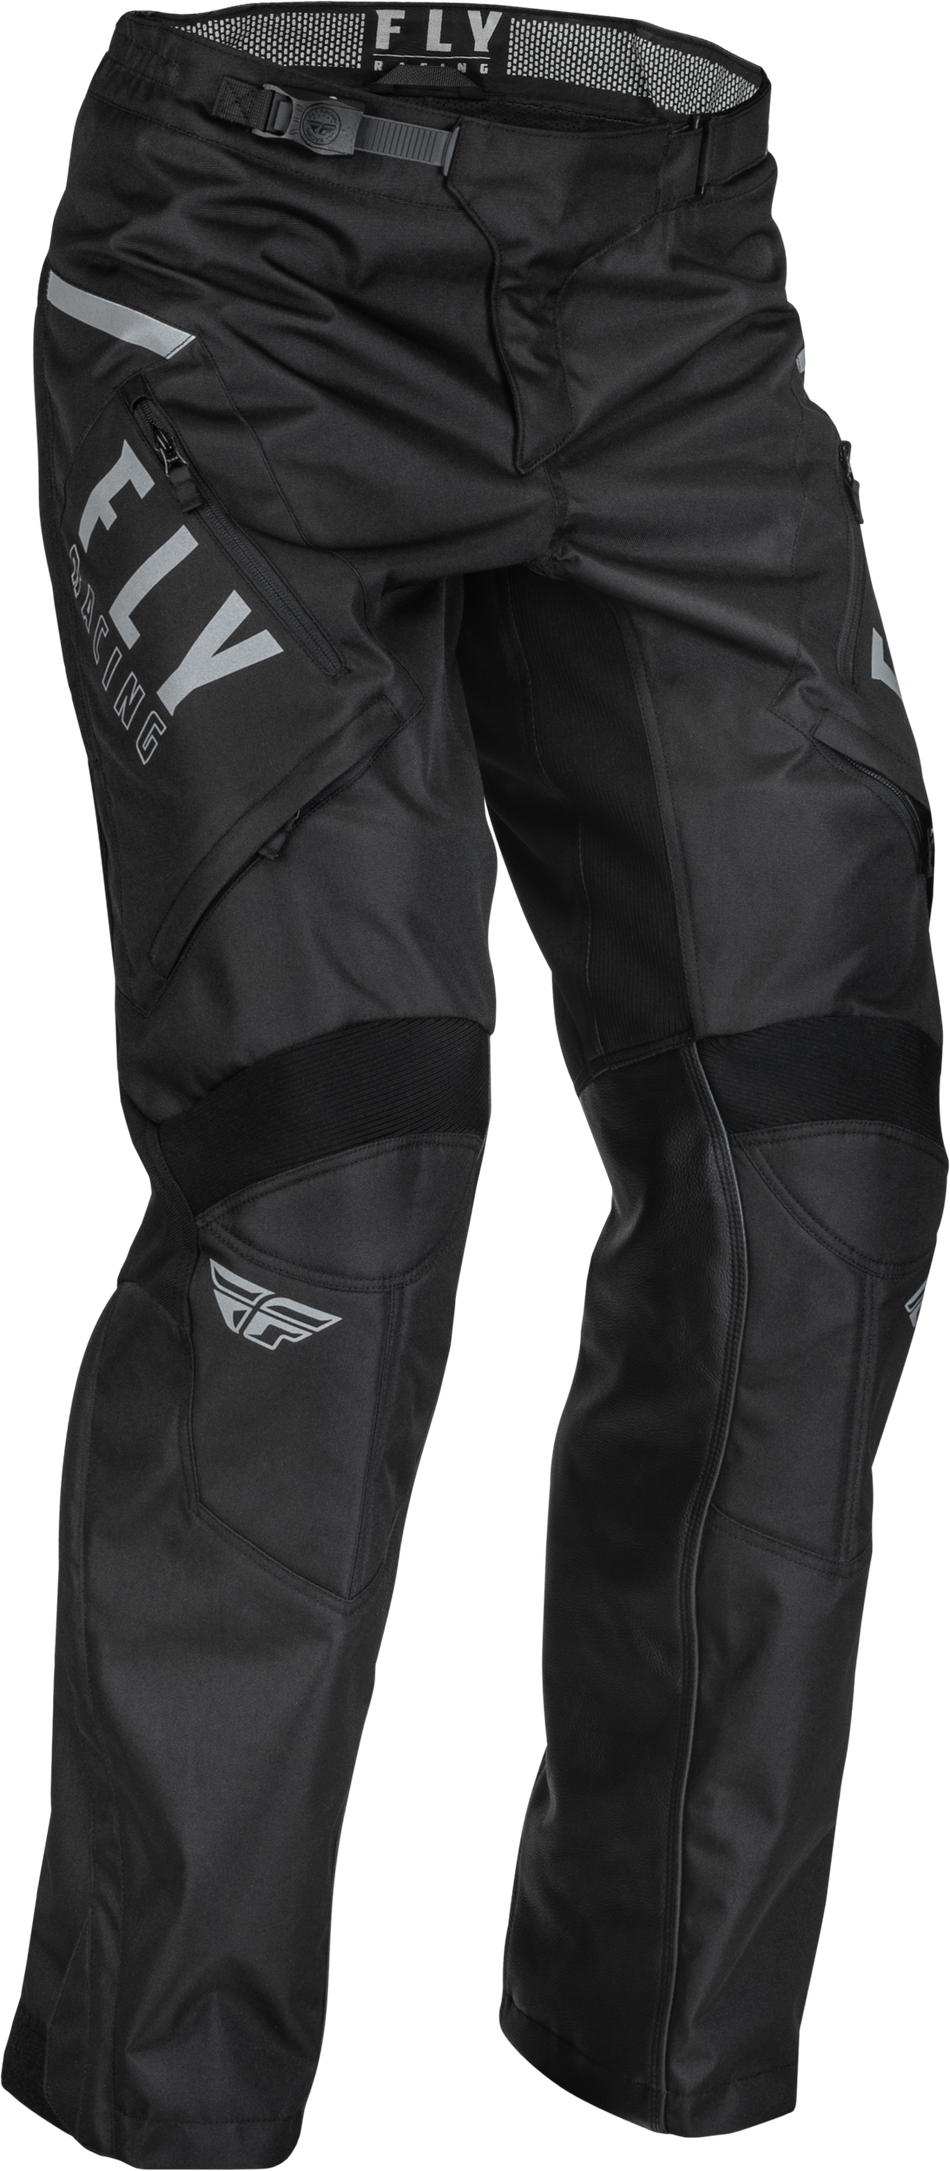 FLY RACING Patrol Over-Boot Pants Black/White Sz 34 376-64034